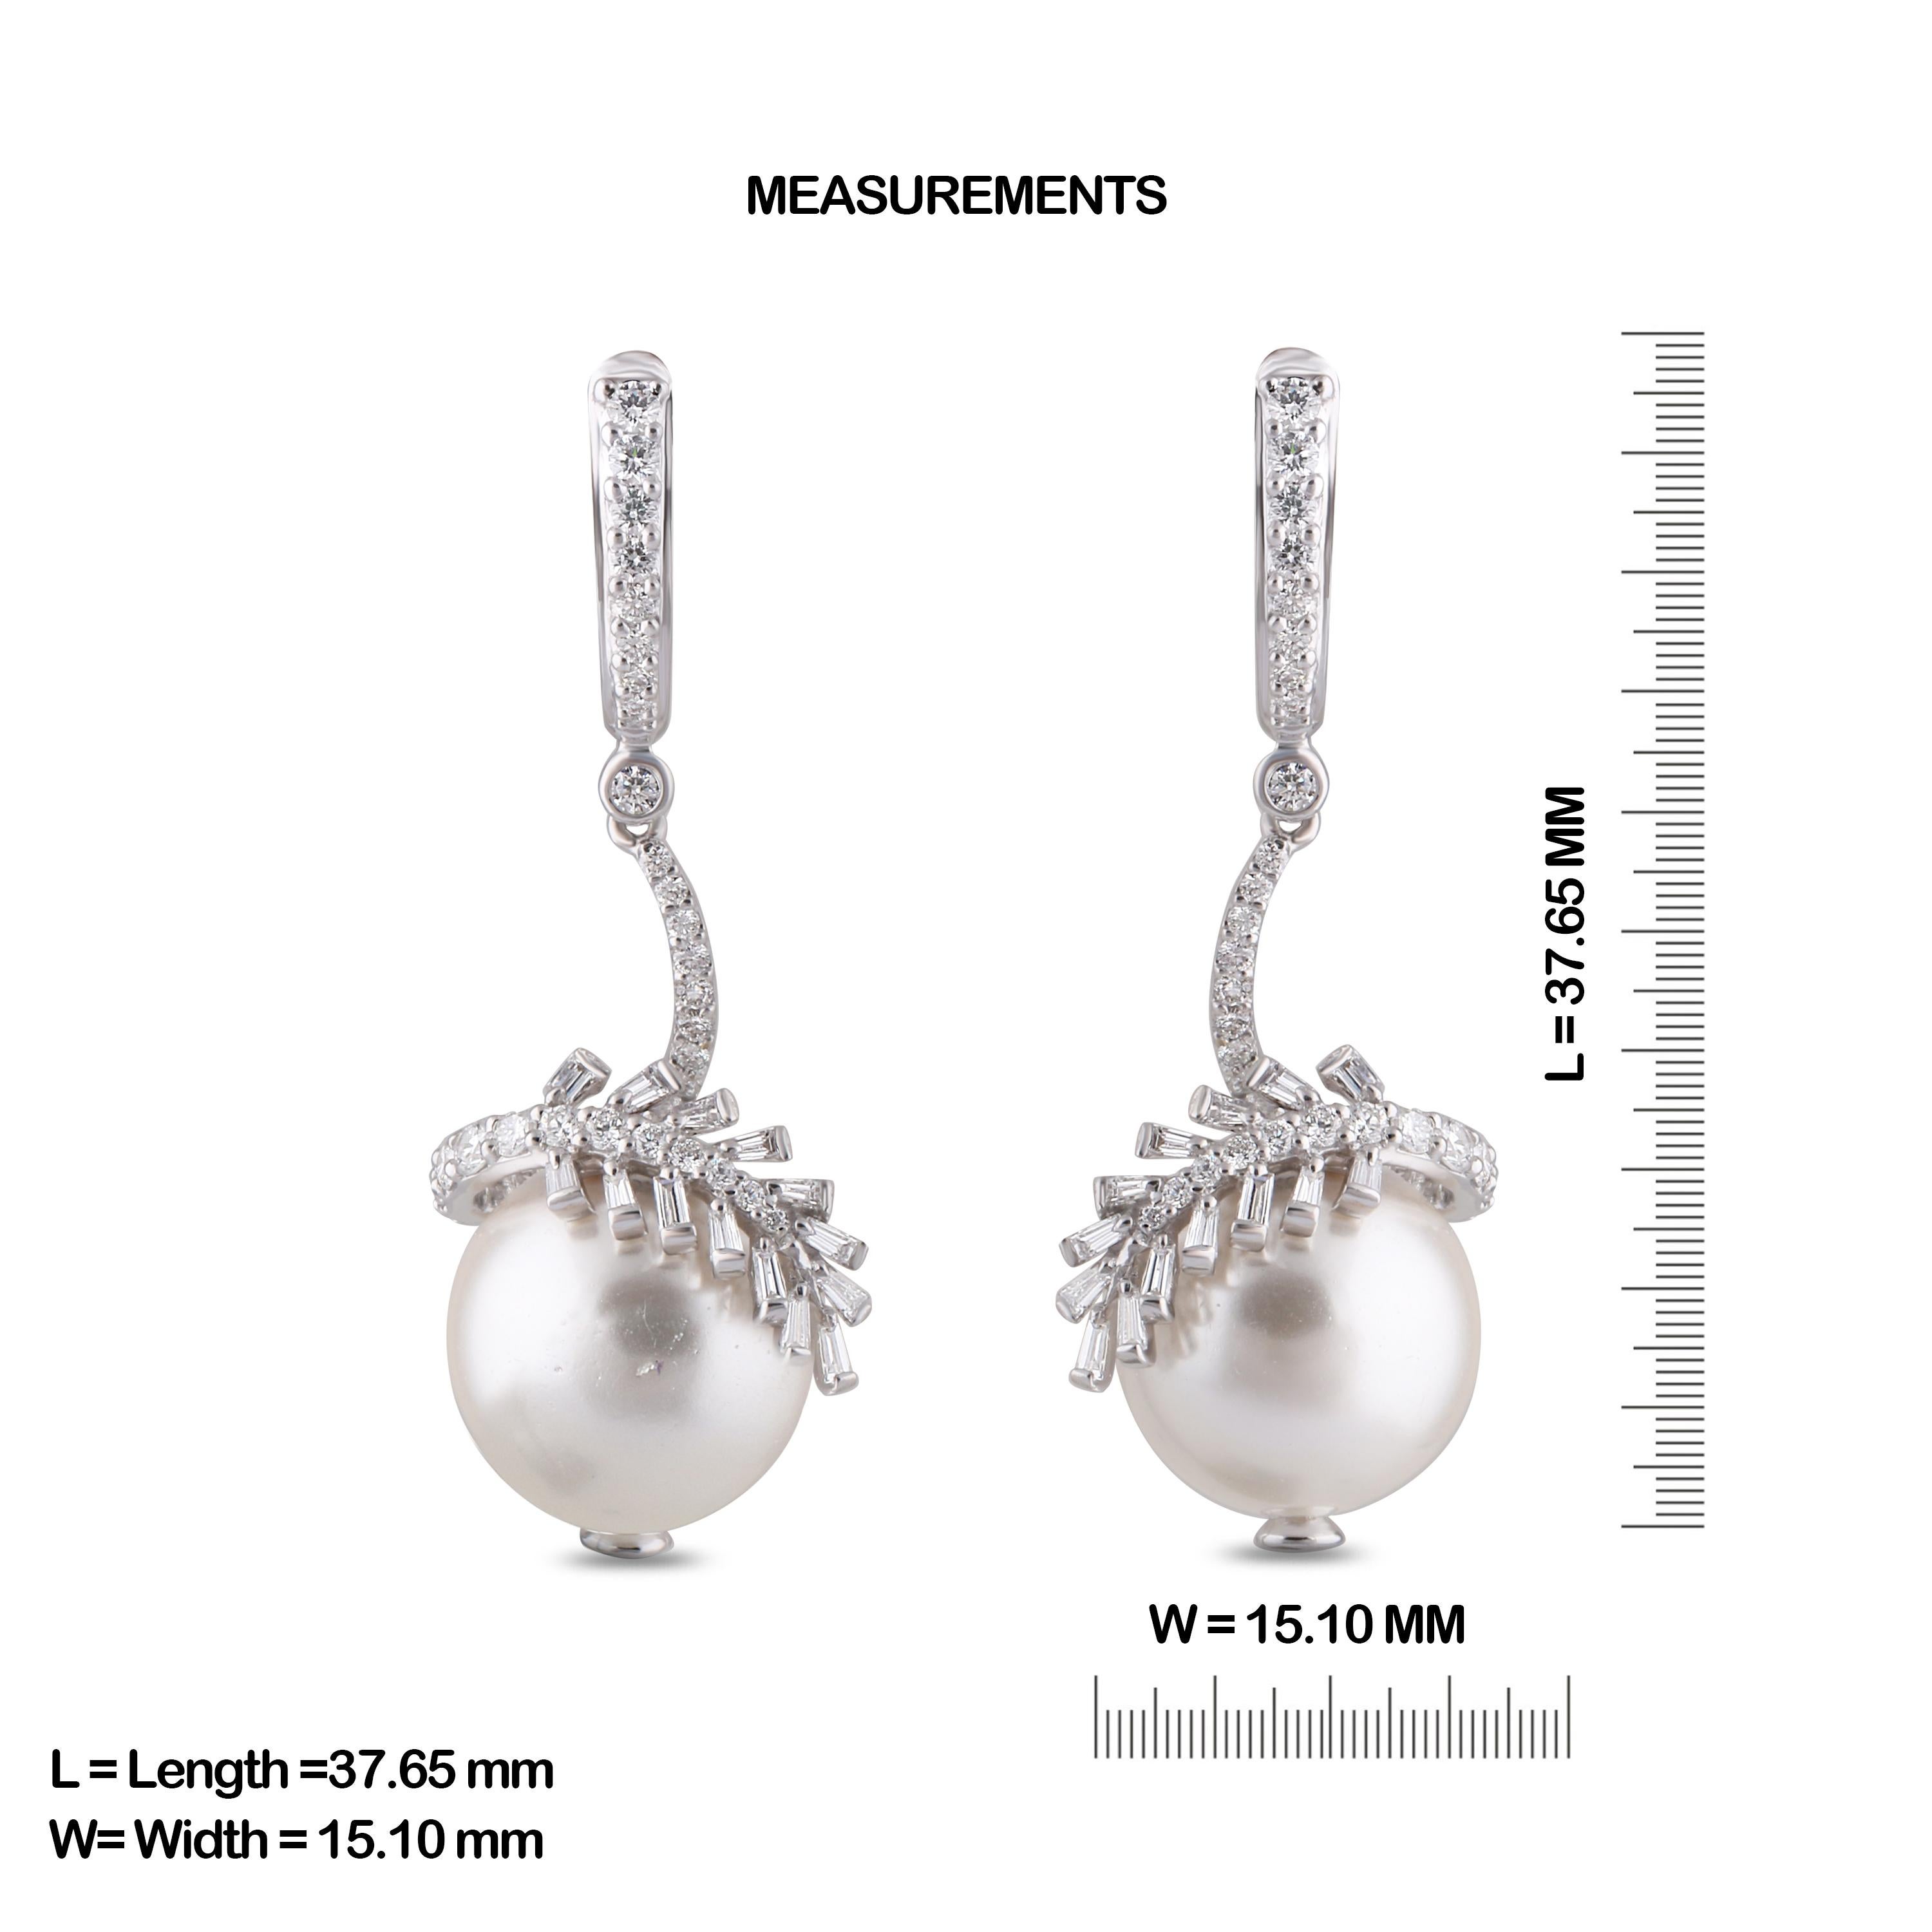 Gross Weight: 10.02 Grams
Diamond Weight: 0.96 cts
South Sea Pearls Weight: 24.46 cts
IGI Certification can be done on request.

Video of the product can be shared on request

The artistic setting of these diamond and pearl earrings is fit for